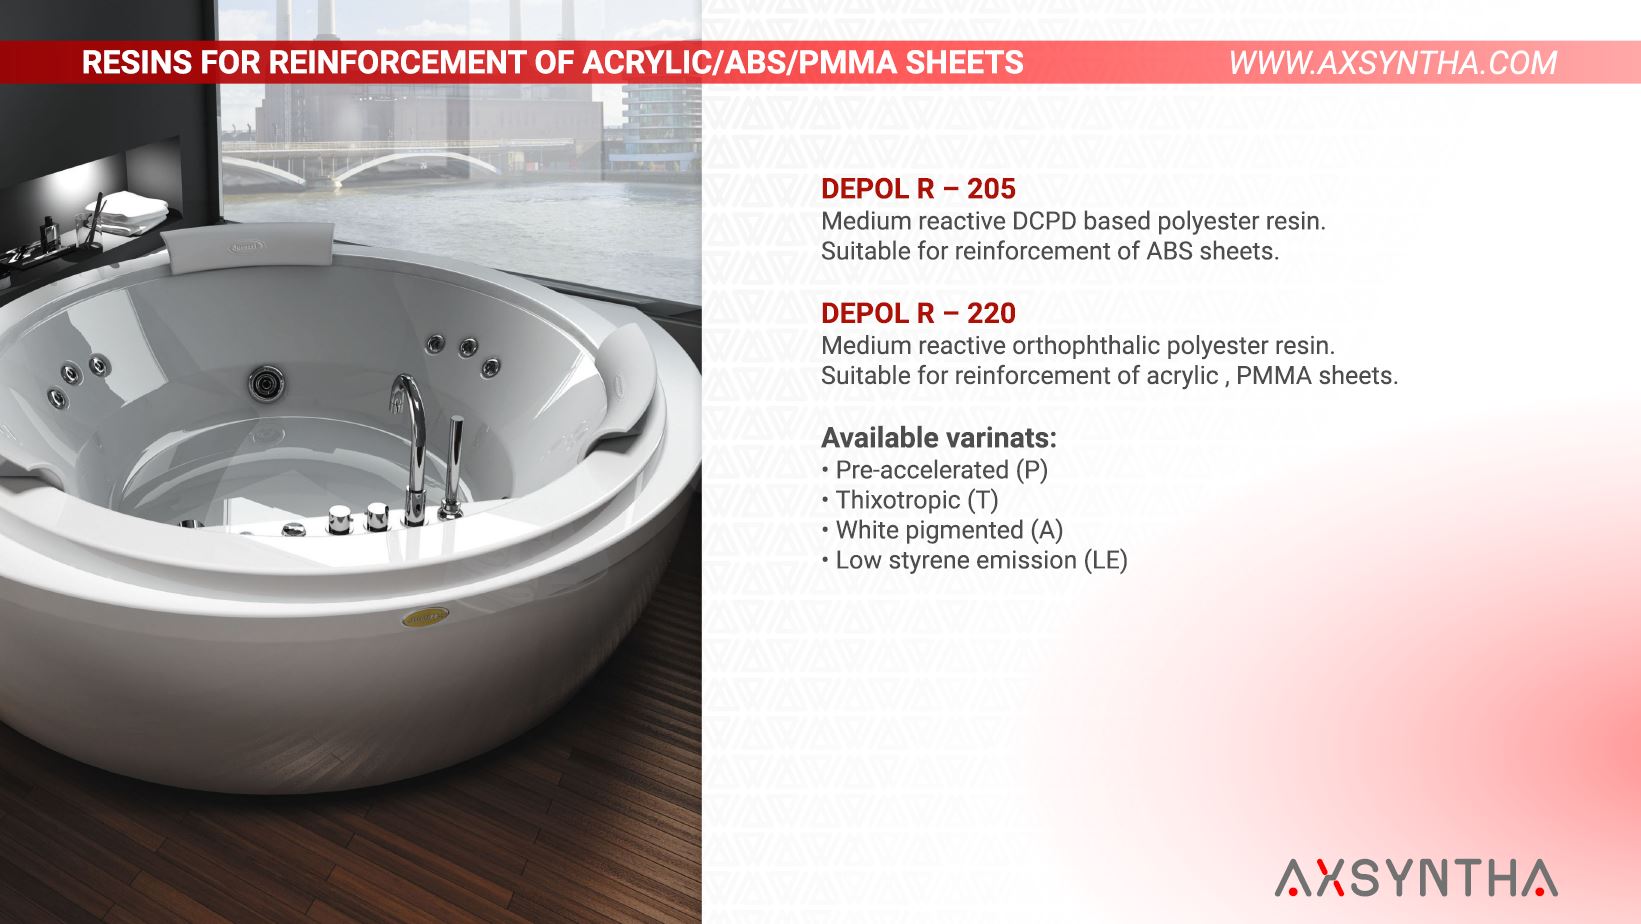 Axsyntha RESINS FOR REINFORCEMENT OF ACRYLIC/ABS/PMMA SHEETS